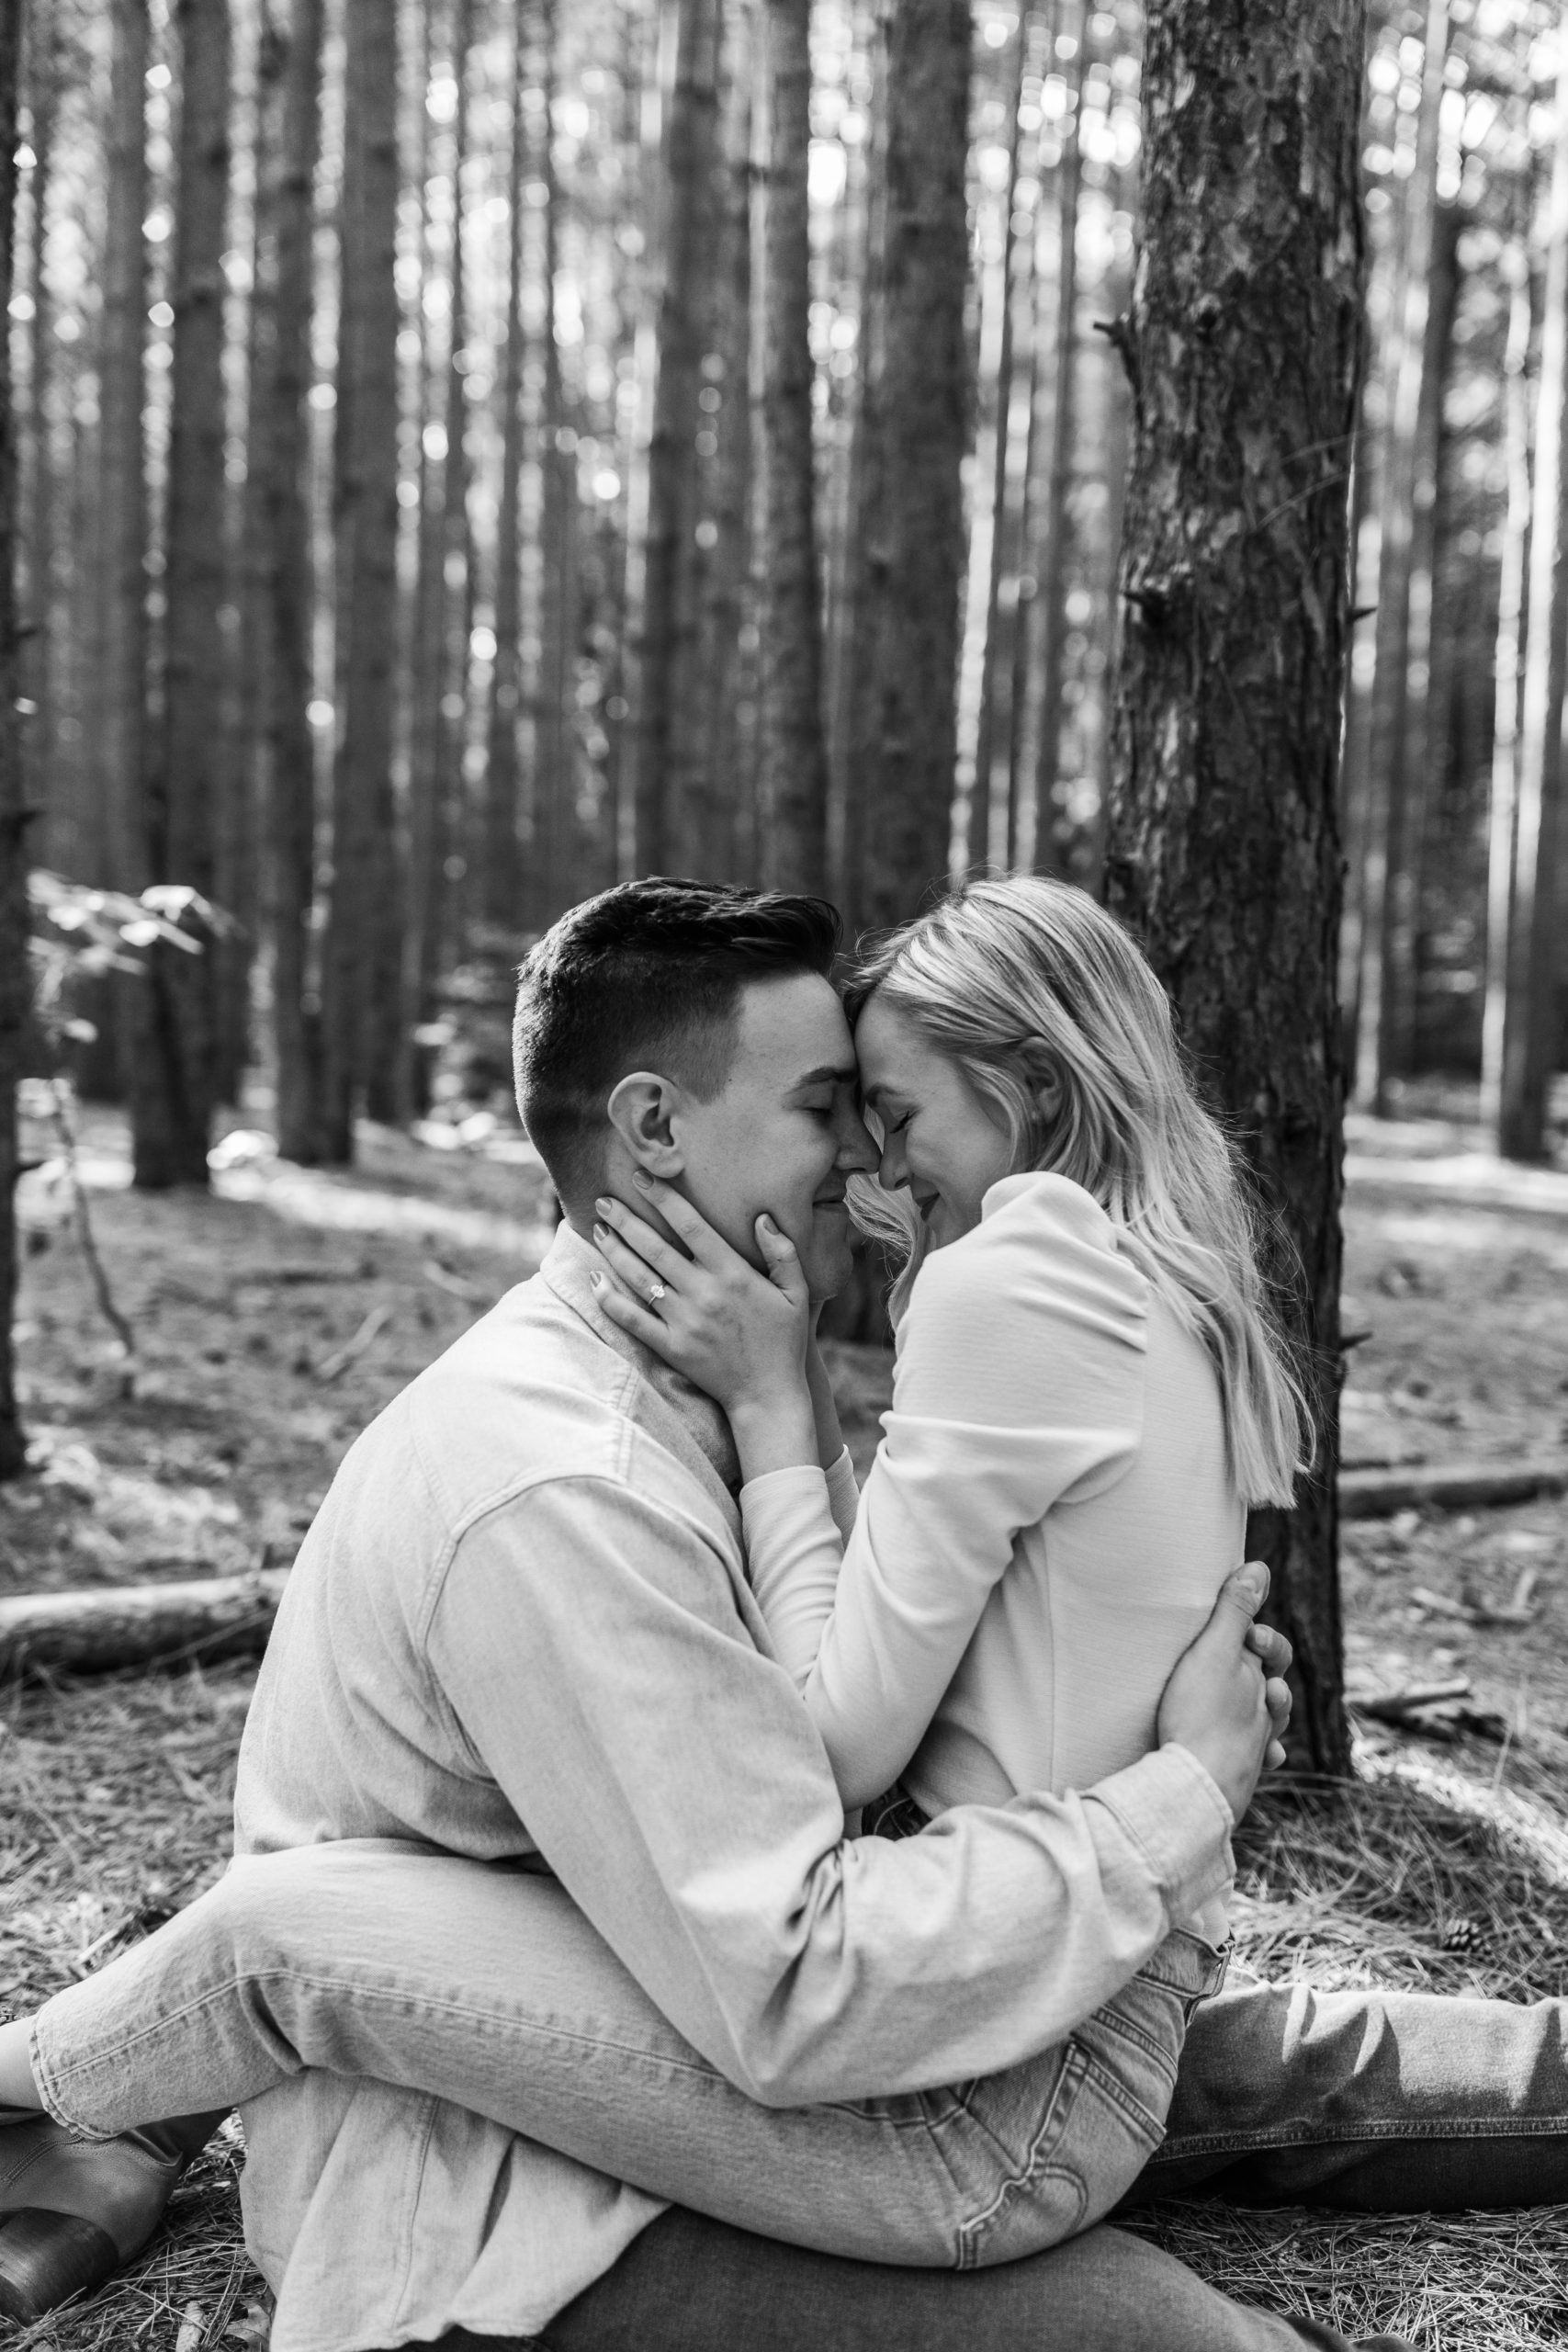 candid couple sitting on the ground hugging in a wooded forest